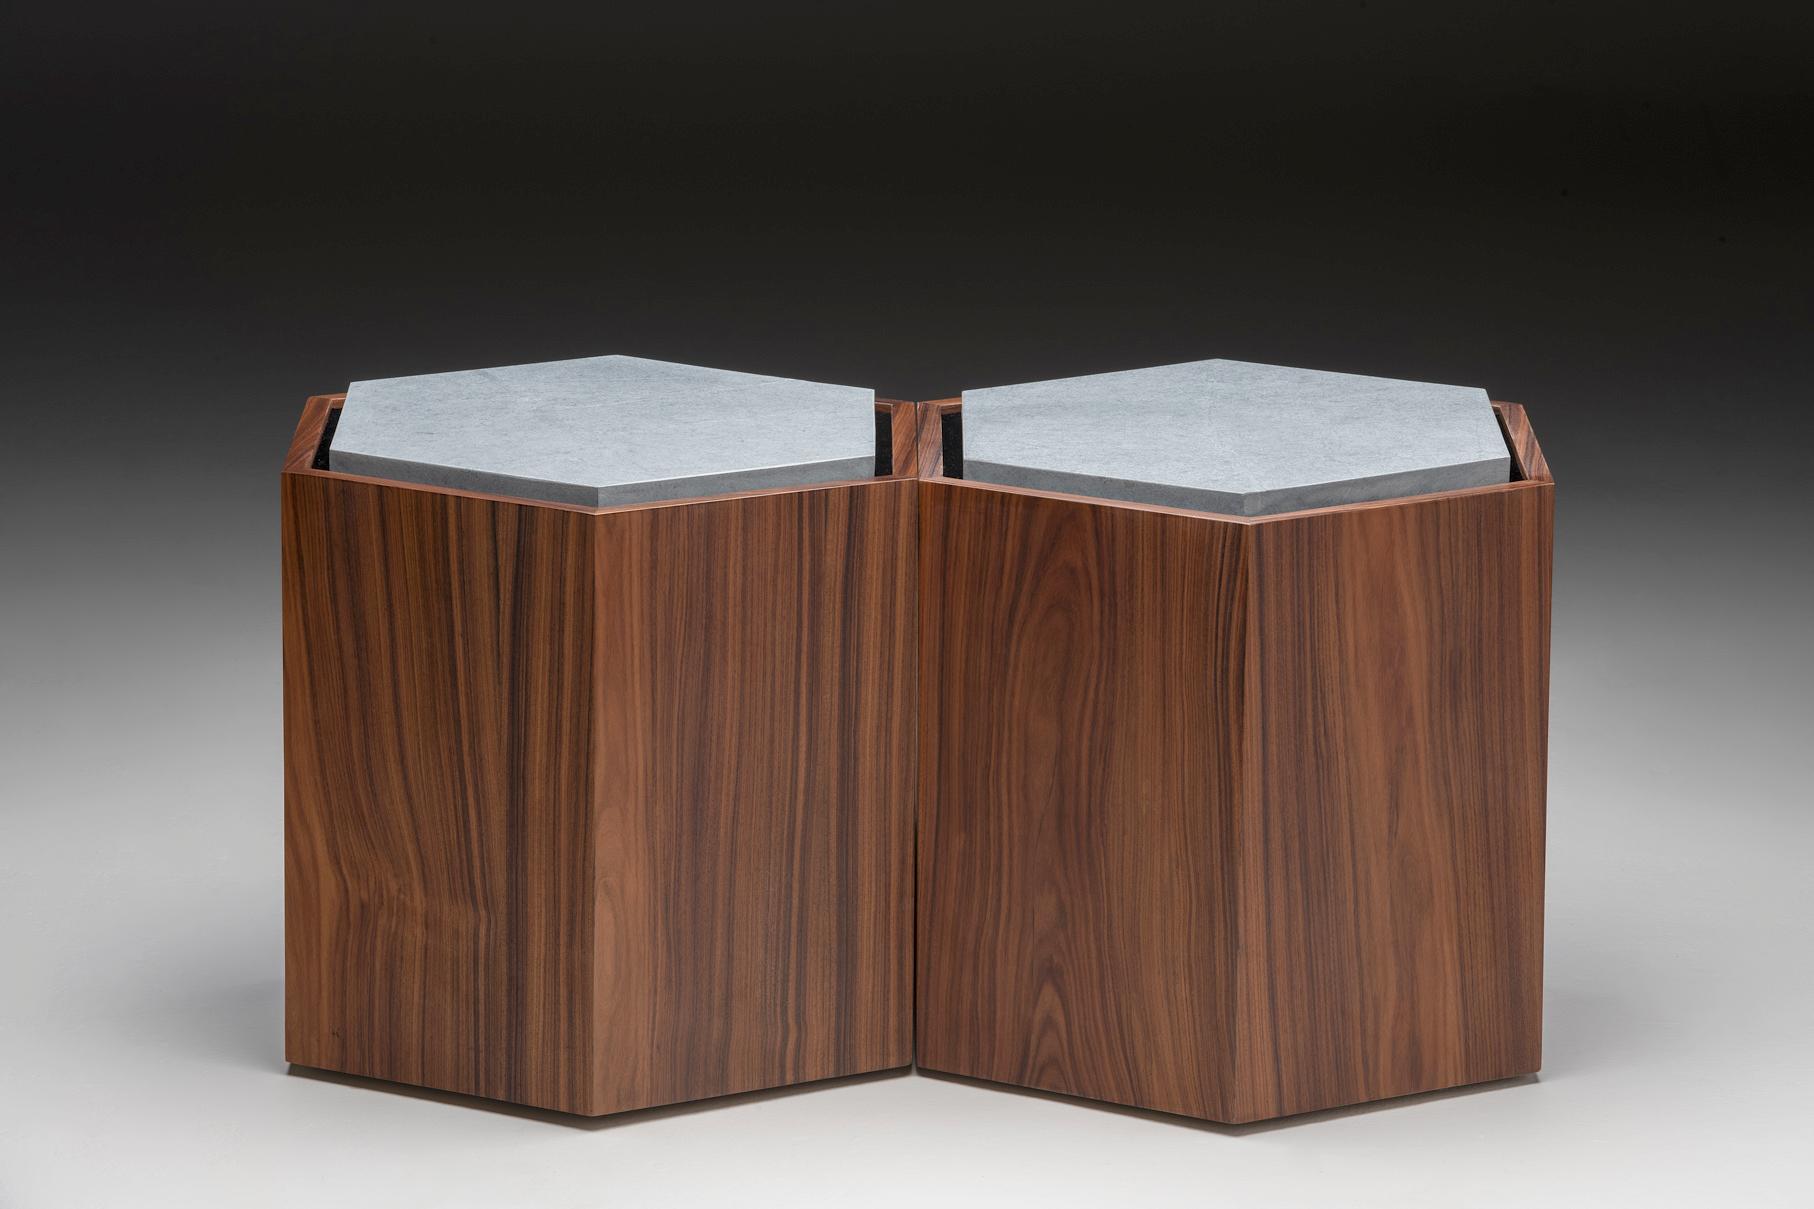 Brazilian Contemporary Stool Side Table in Wood and Stone